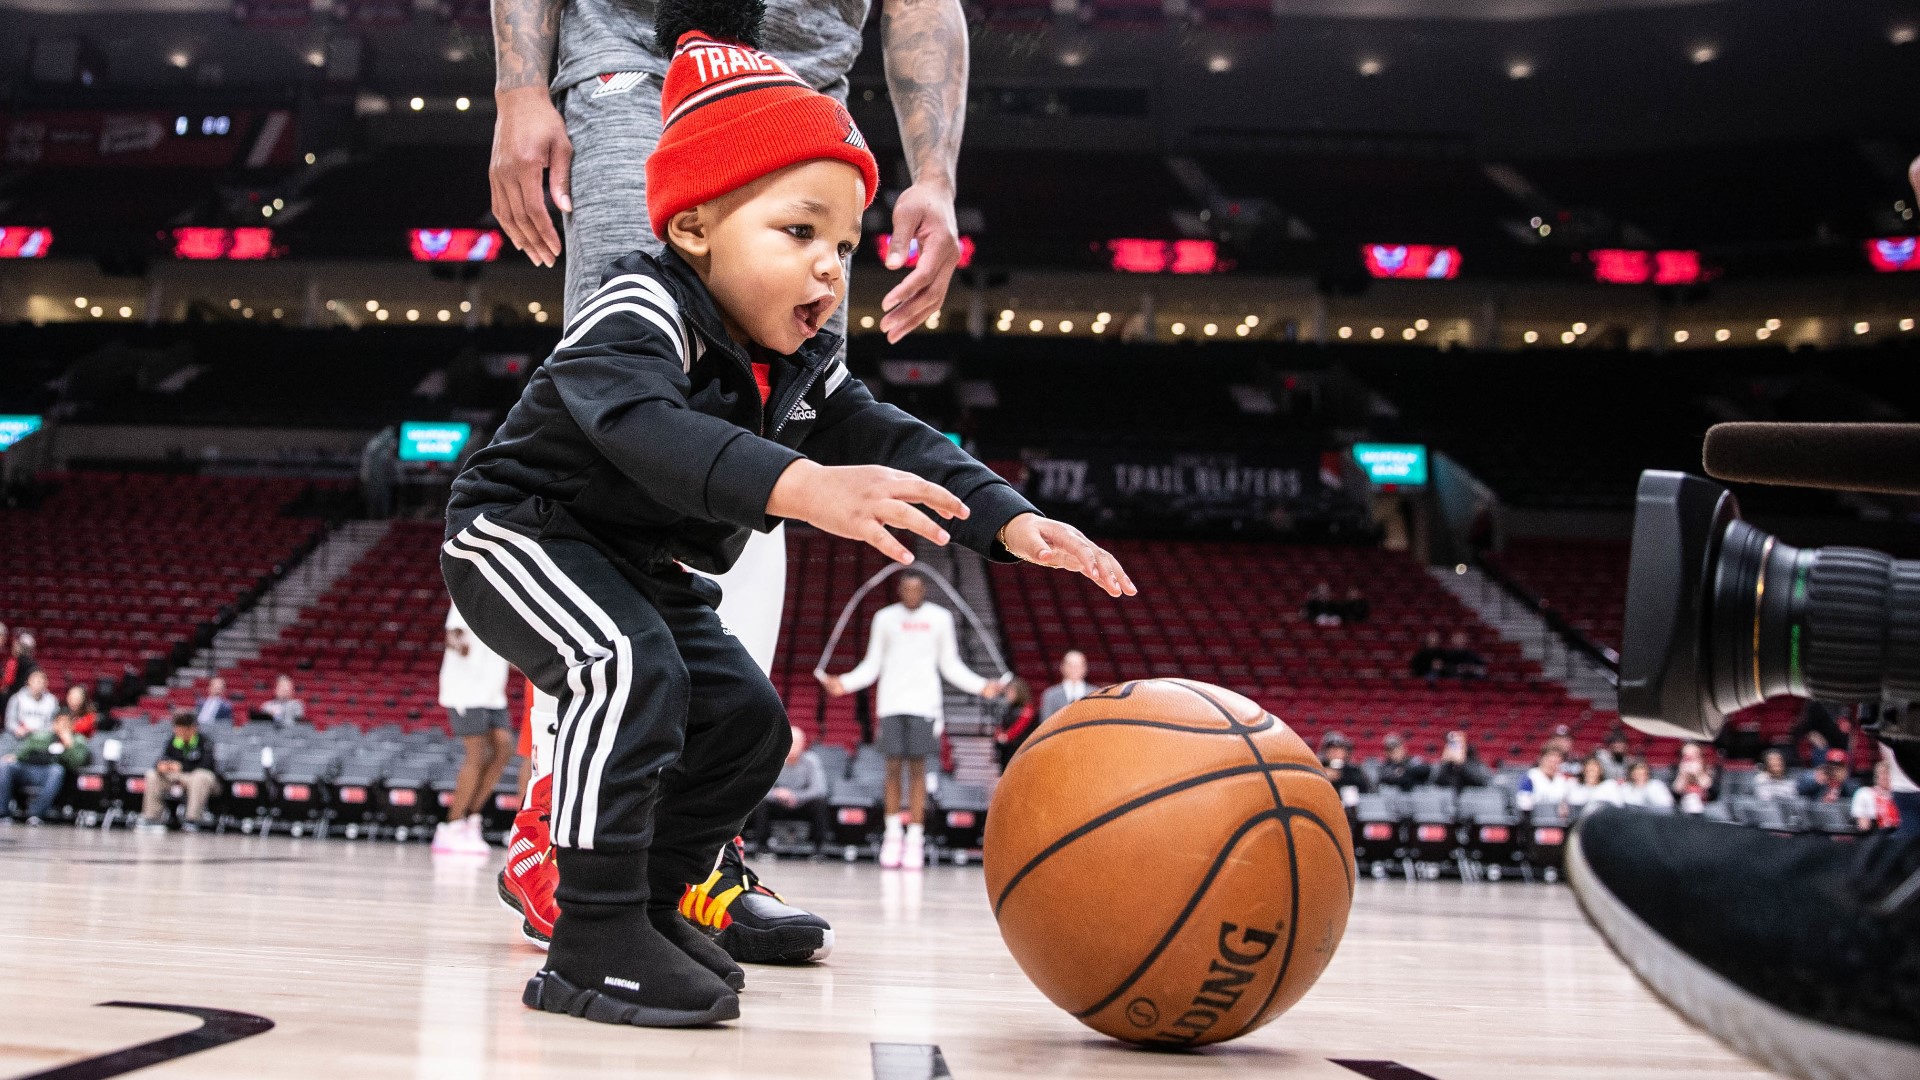 The real show stopper Monday night was Damian Lillard Jr., who joined Dad on the court during warmups and got in on the post-game action, too.